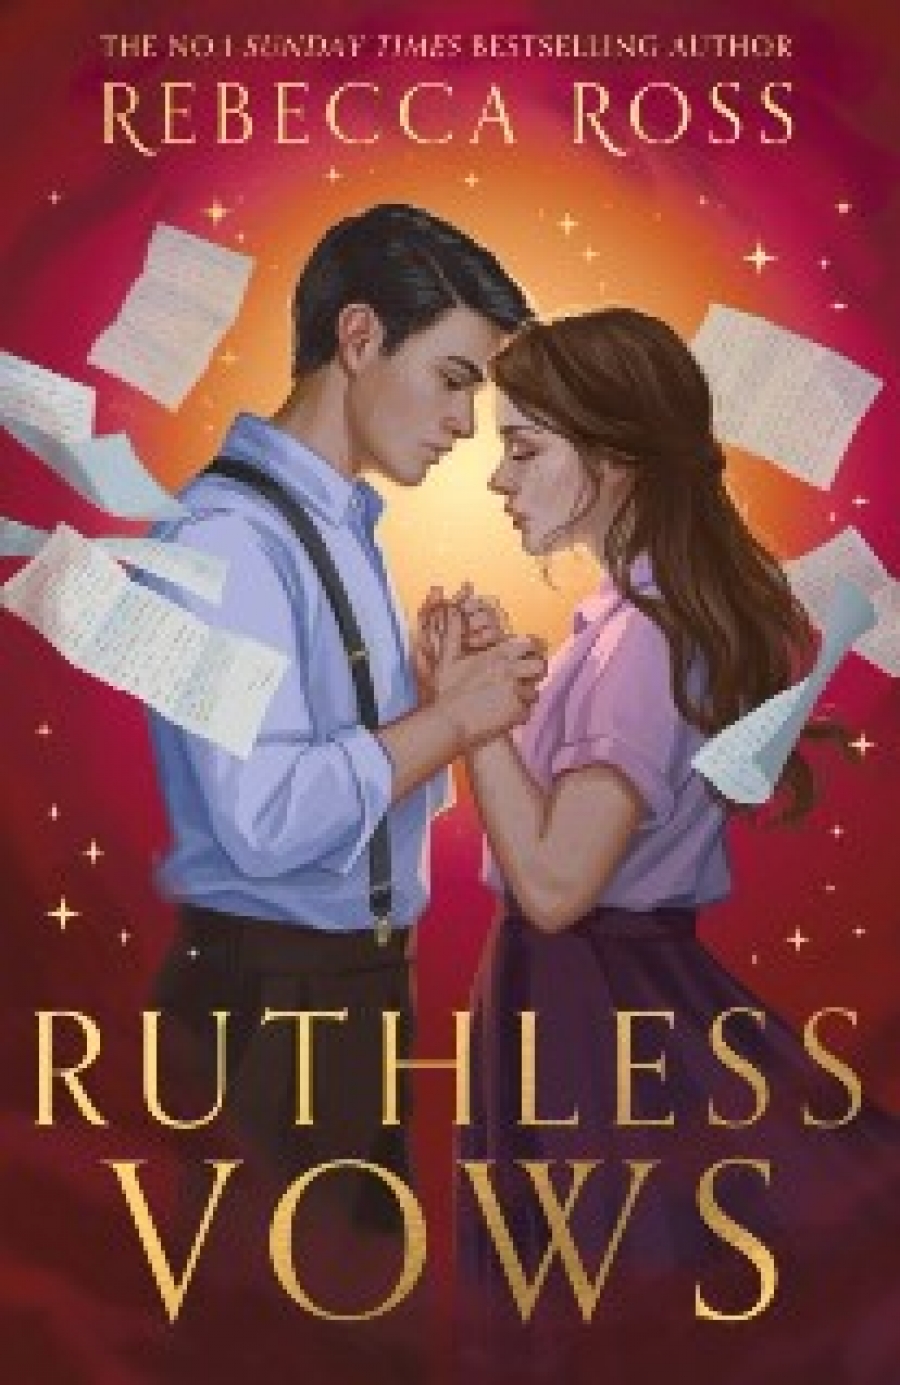 Rebecca, Ross Ruthless vows: Letters of Enchantment (2) 